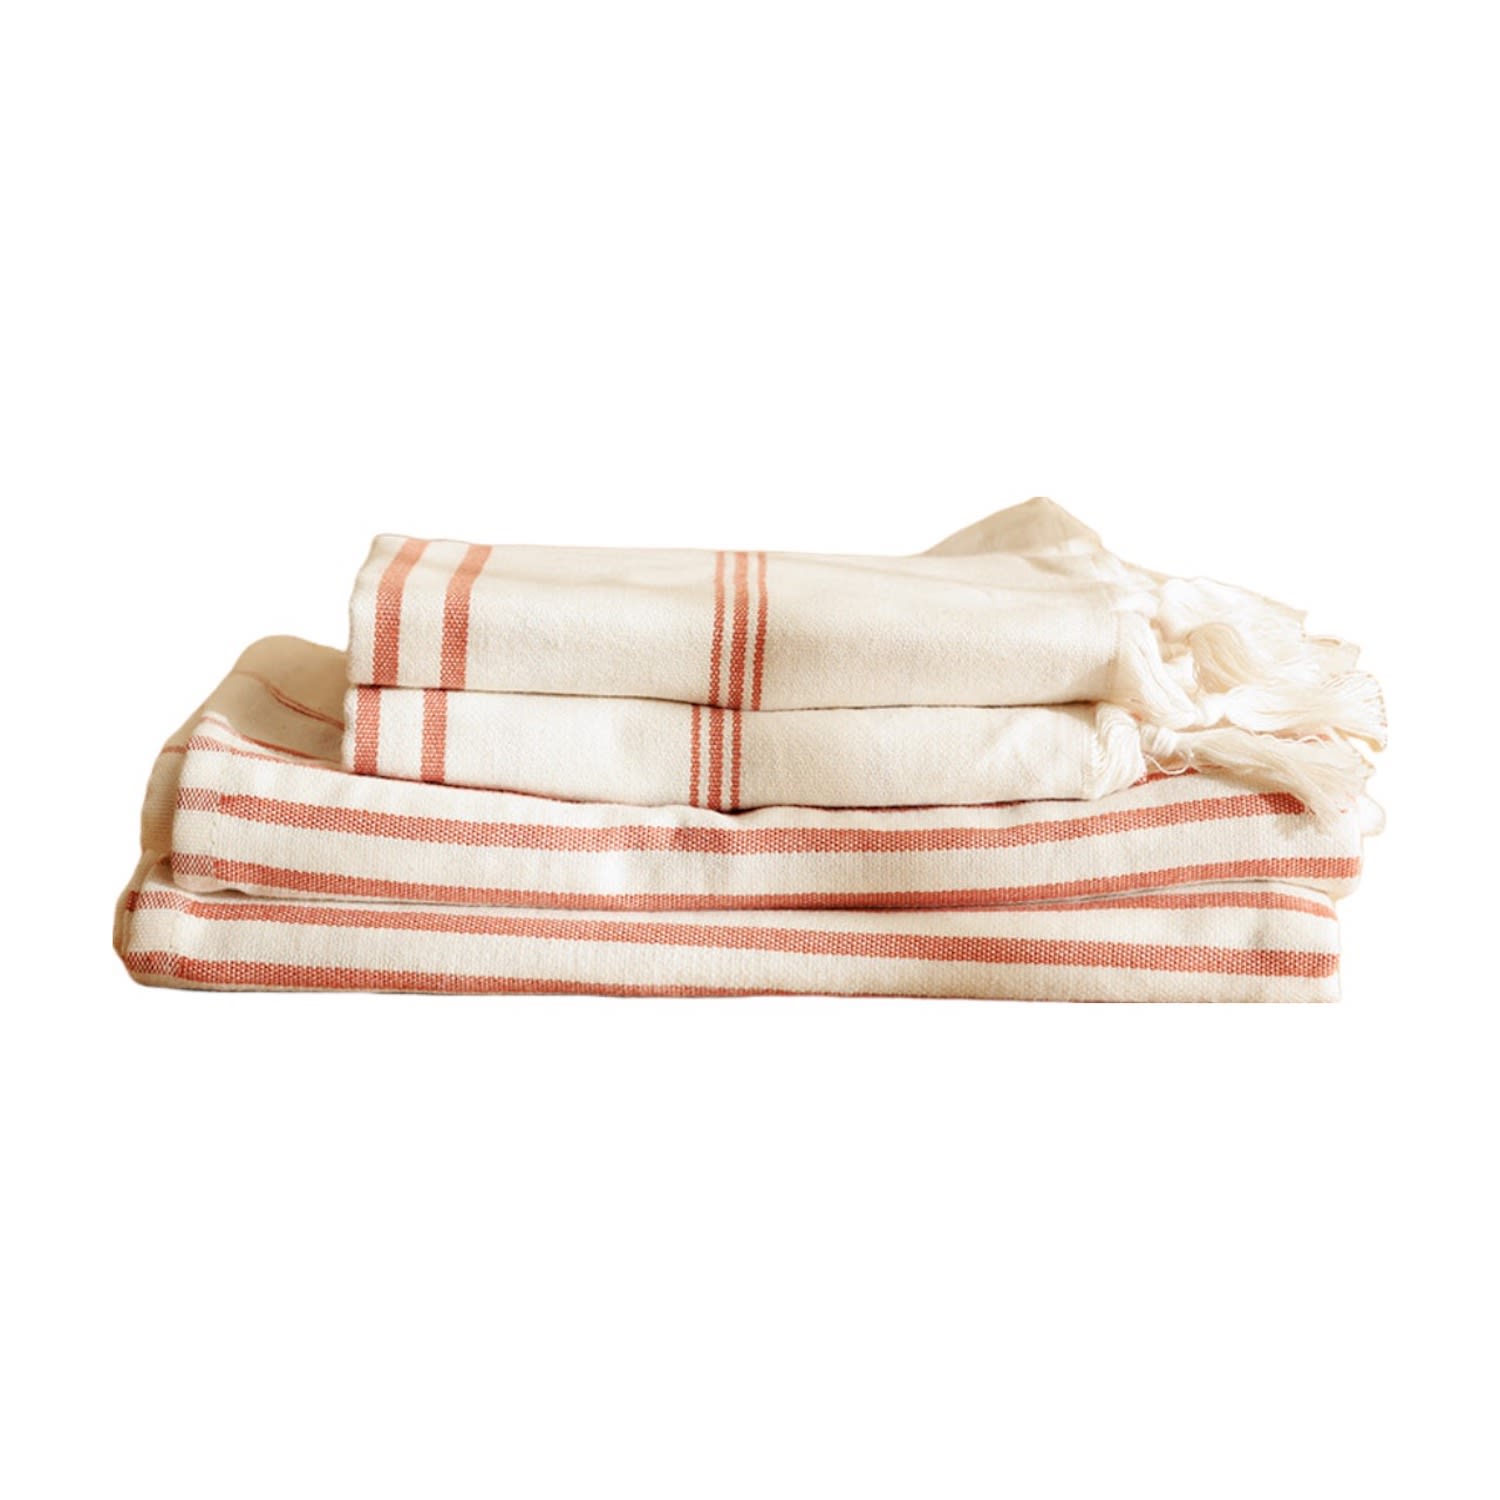 Red Organic Cotton Turkish Towel Set Of 4 - Clay Droplet Home Goods